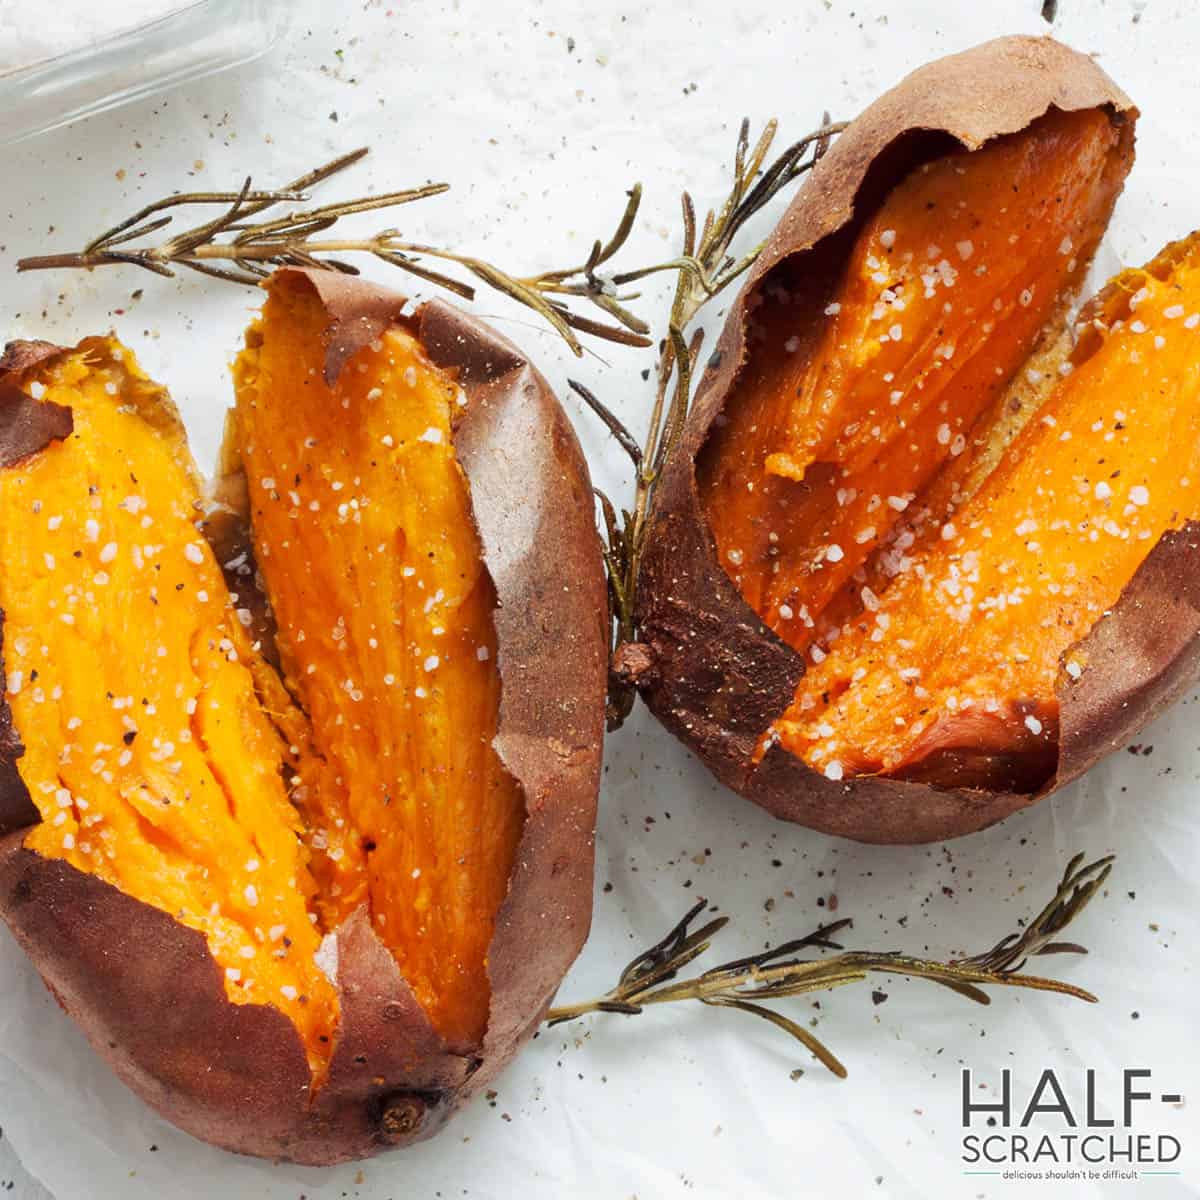 Oven baked sweet potatoes at 400F